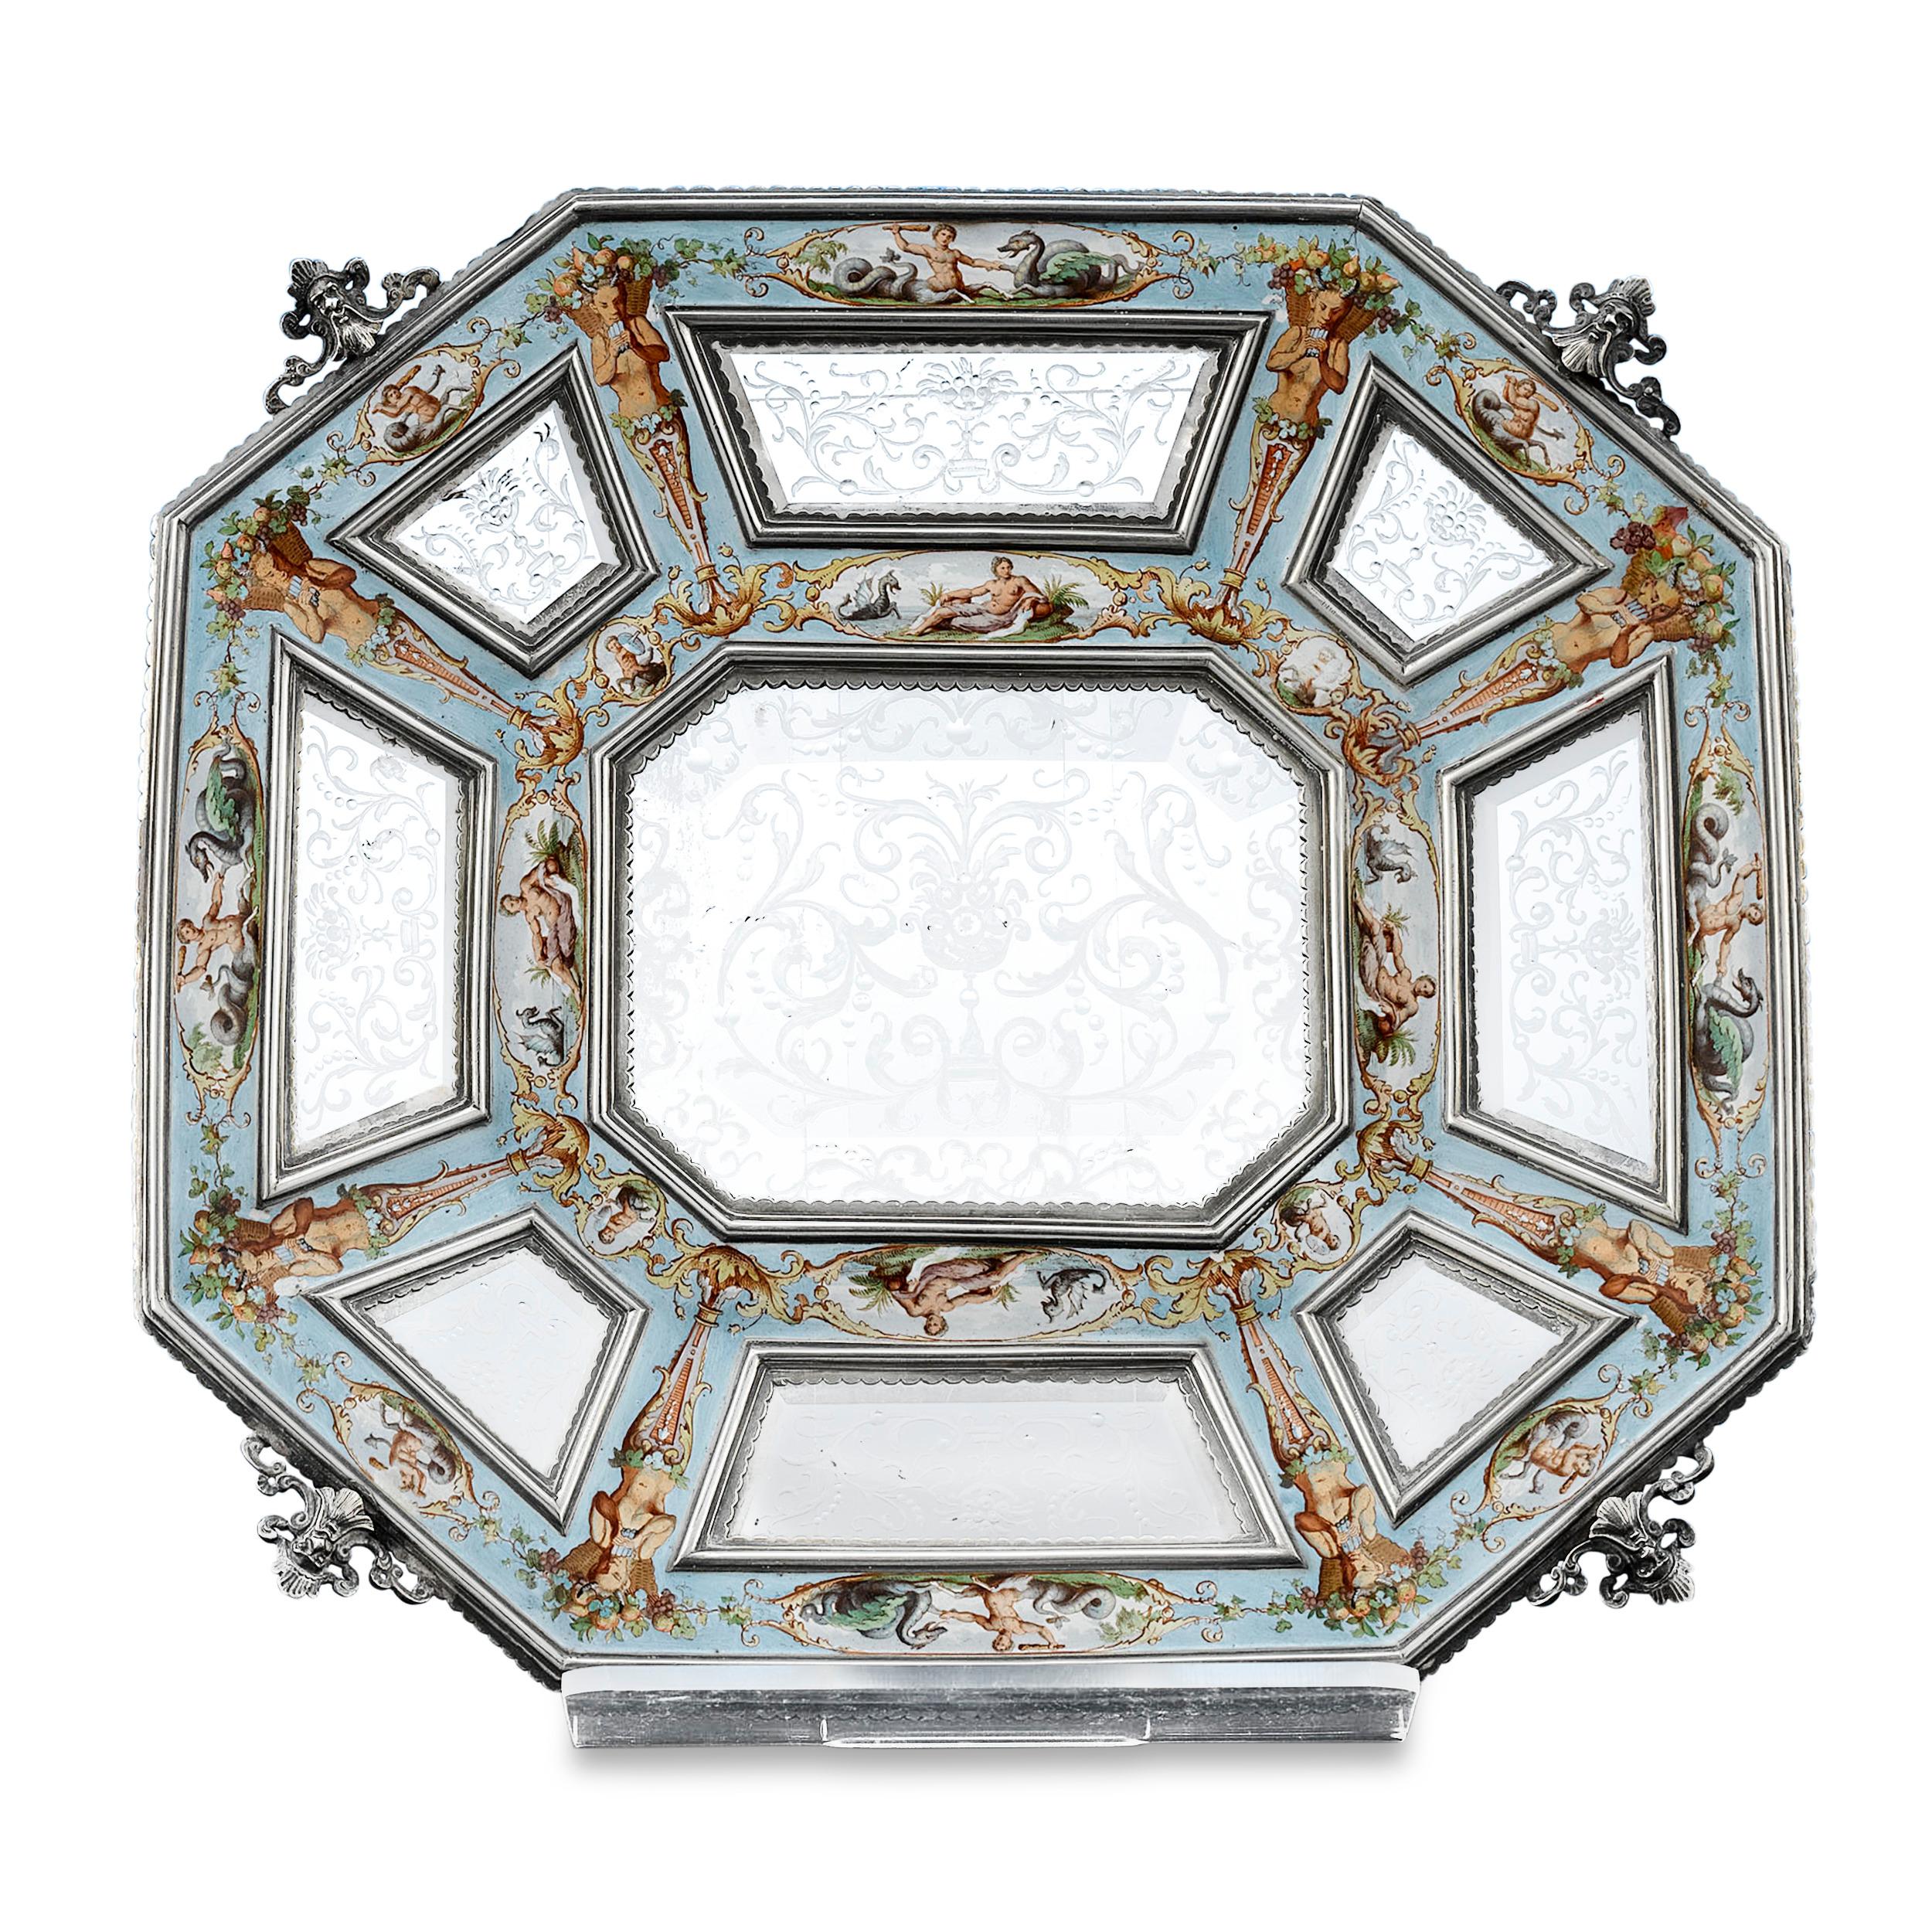 This magnificent Viennese salver, intricately carved from solid rock crystal, combines the mastery of the Viennese enameling tradition with the radiance of rock crystal. Mounted in a silver frame, plaques of intricately etched natural quartz are